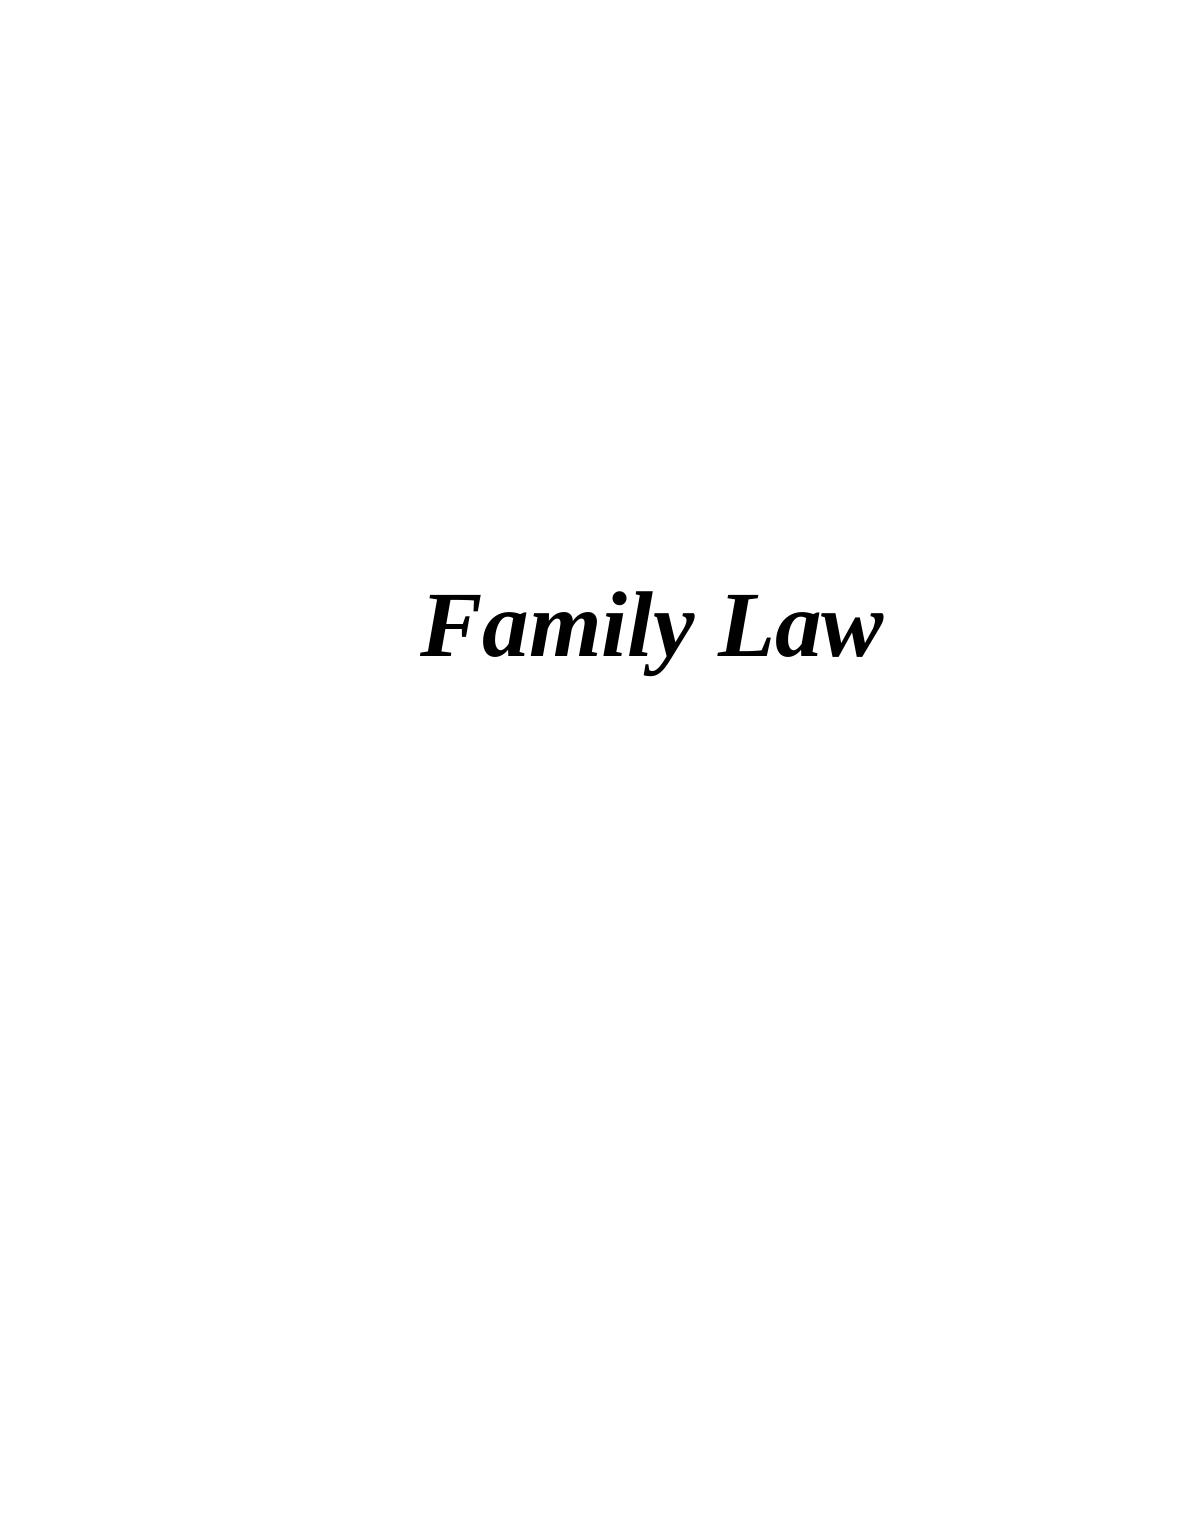 Divorce and Financial Orders in Family Law_1